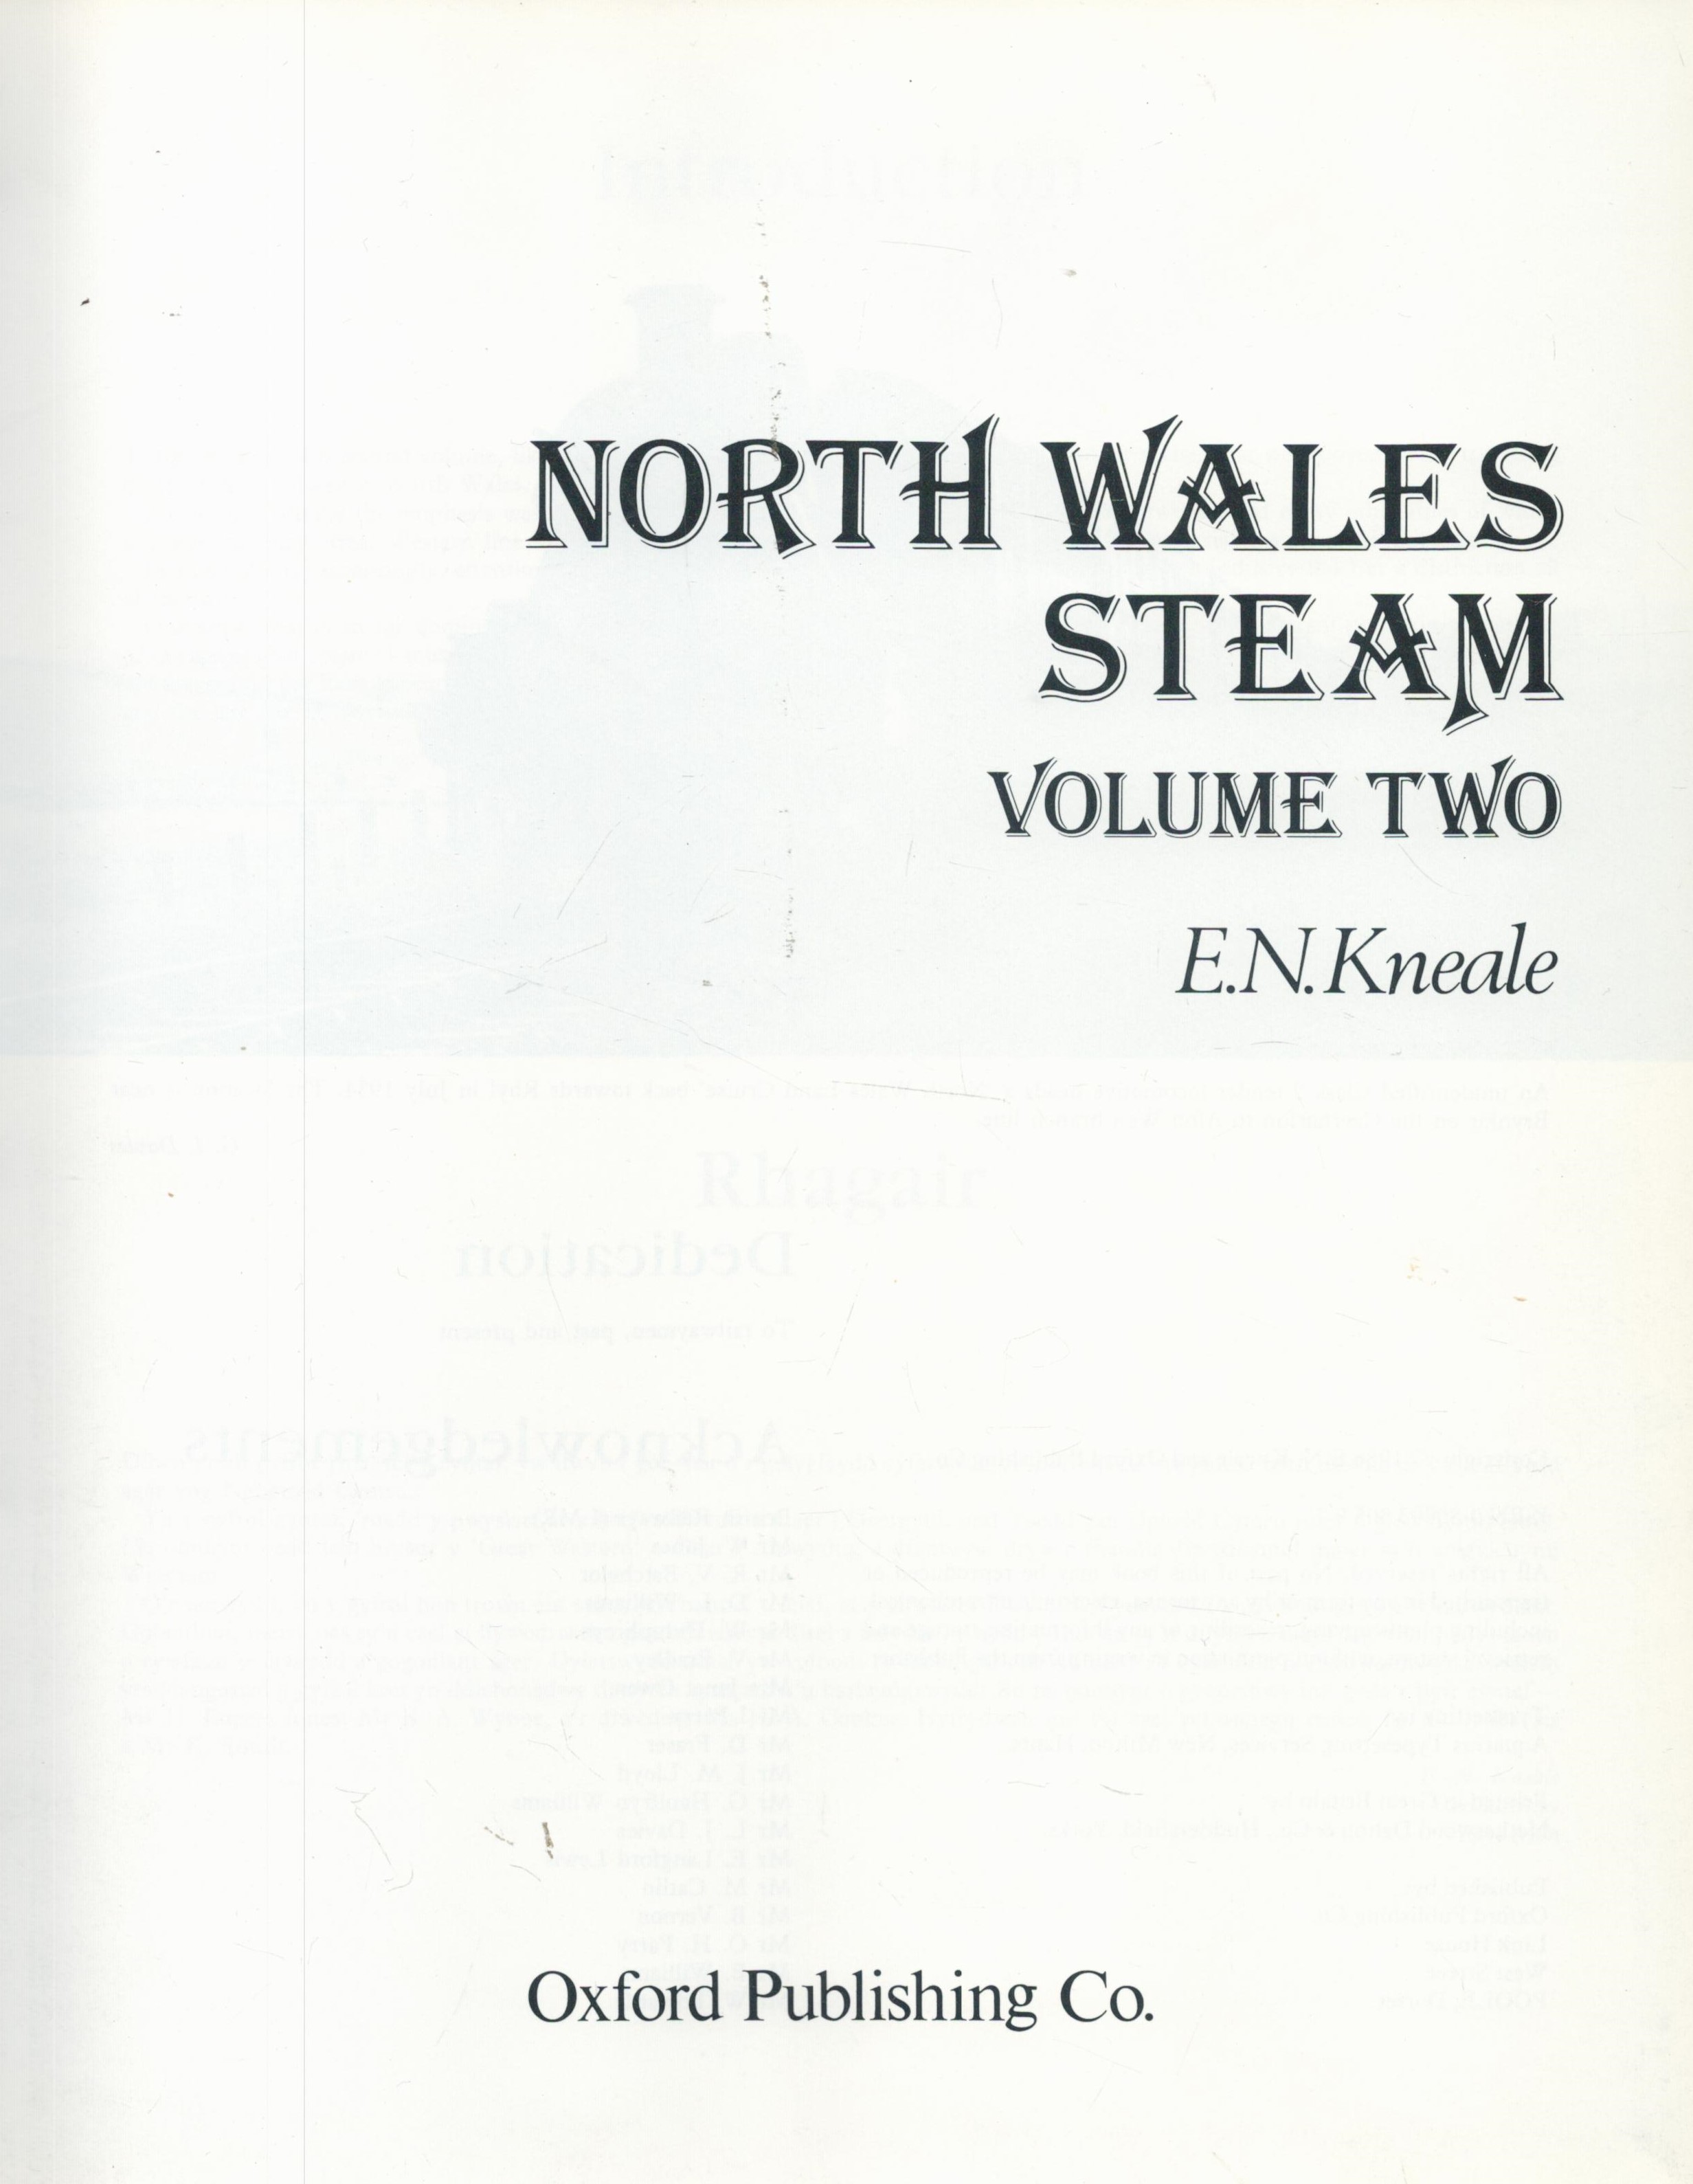 North Wales Steam vol 2 by E N Kneale 1986 First Edition Hardback Book published by Oxford - Image 2 of 3